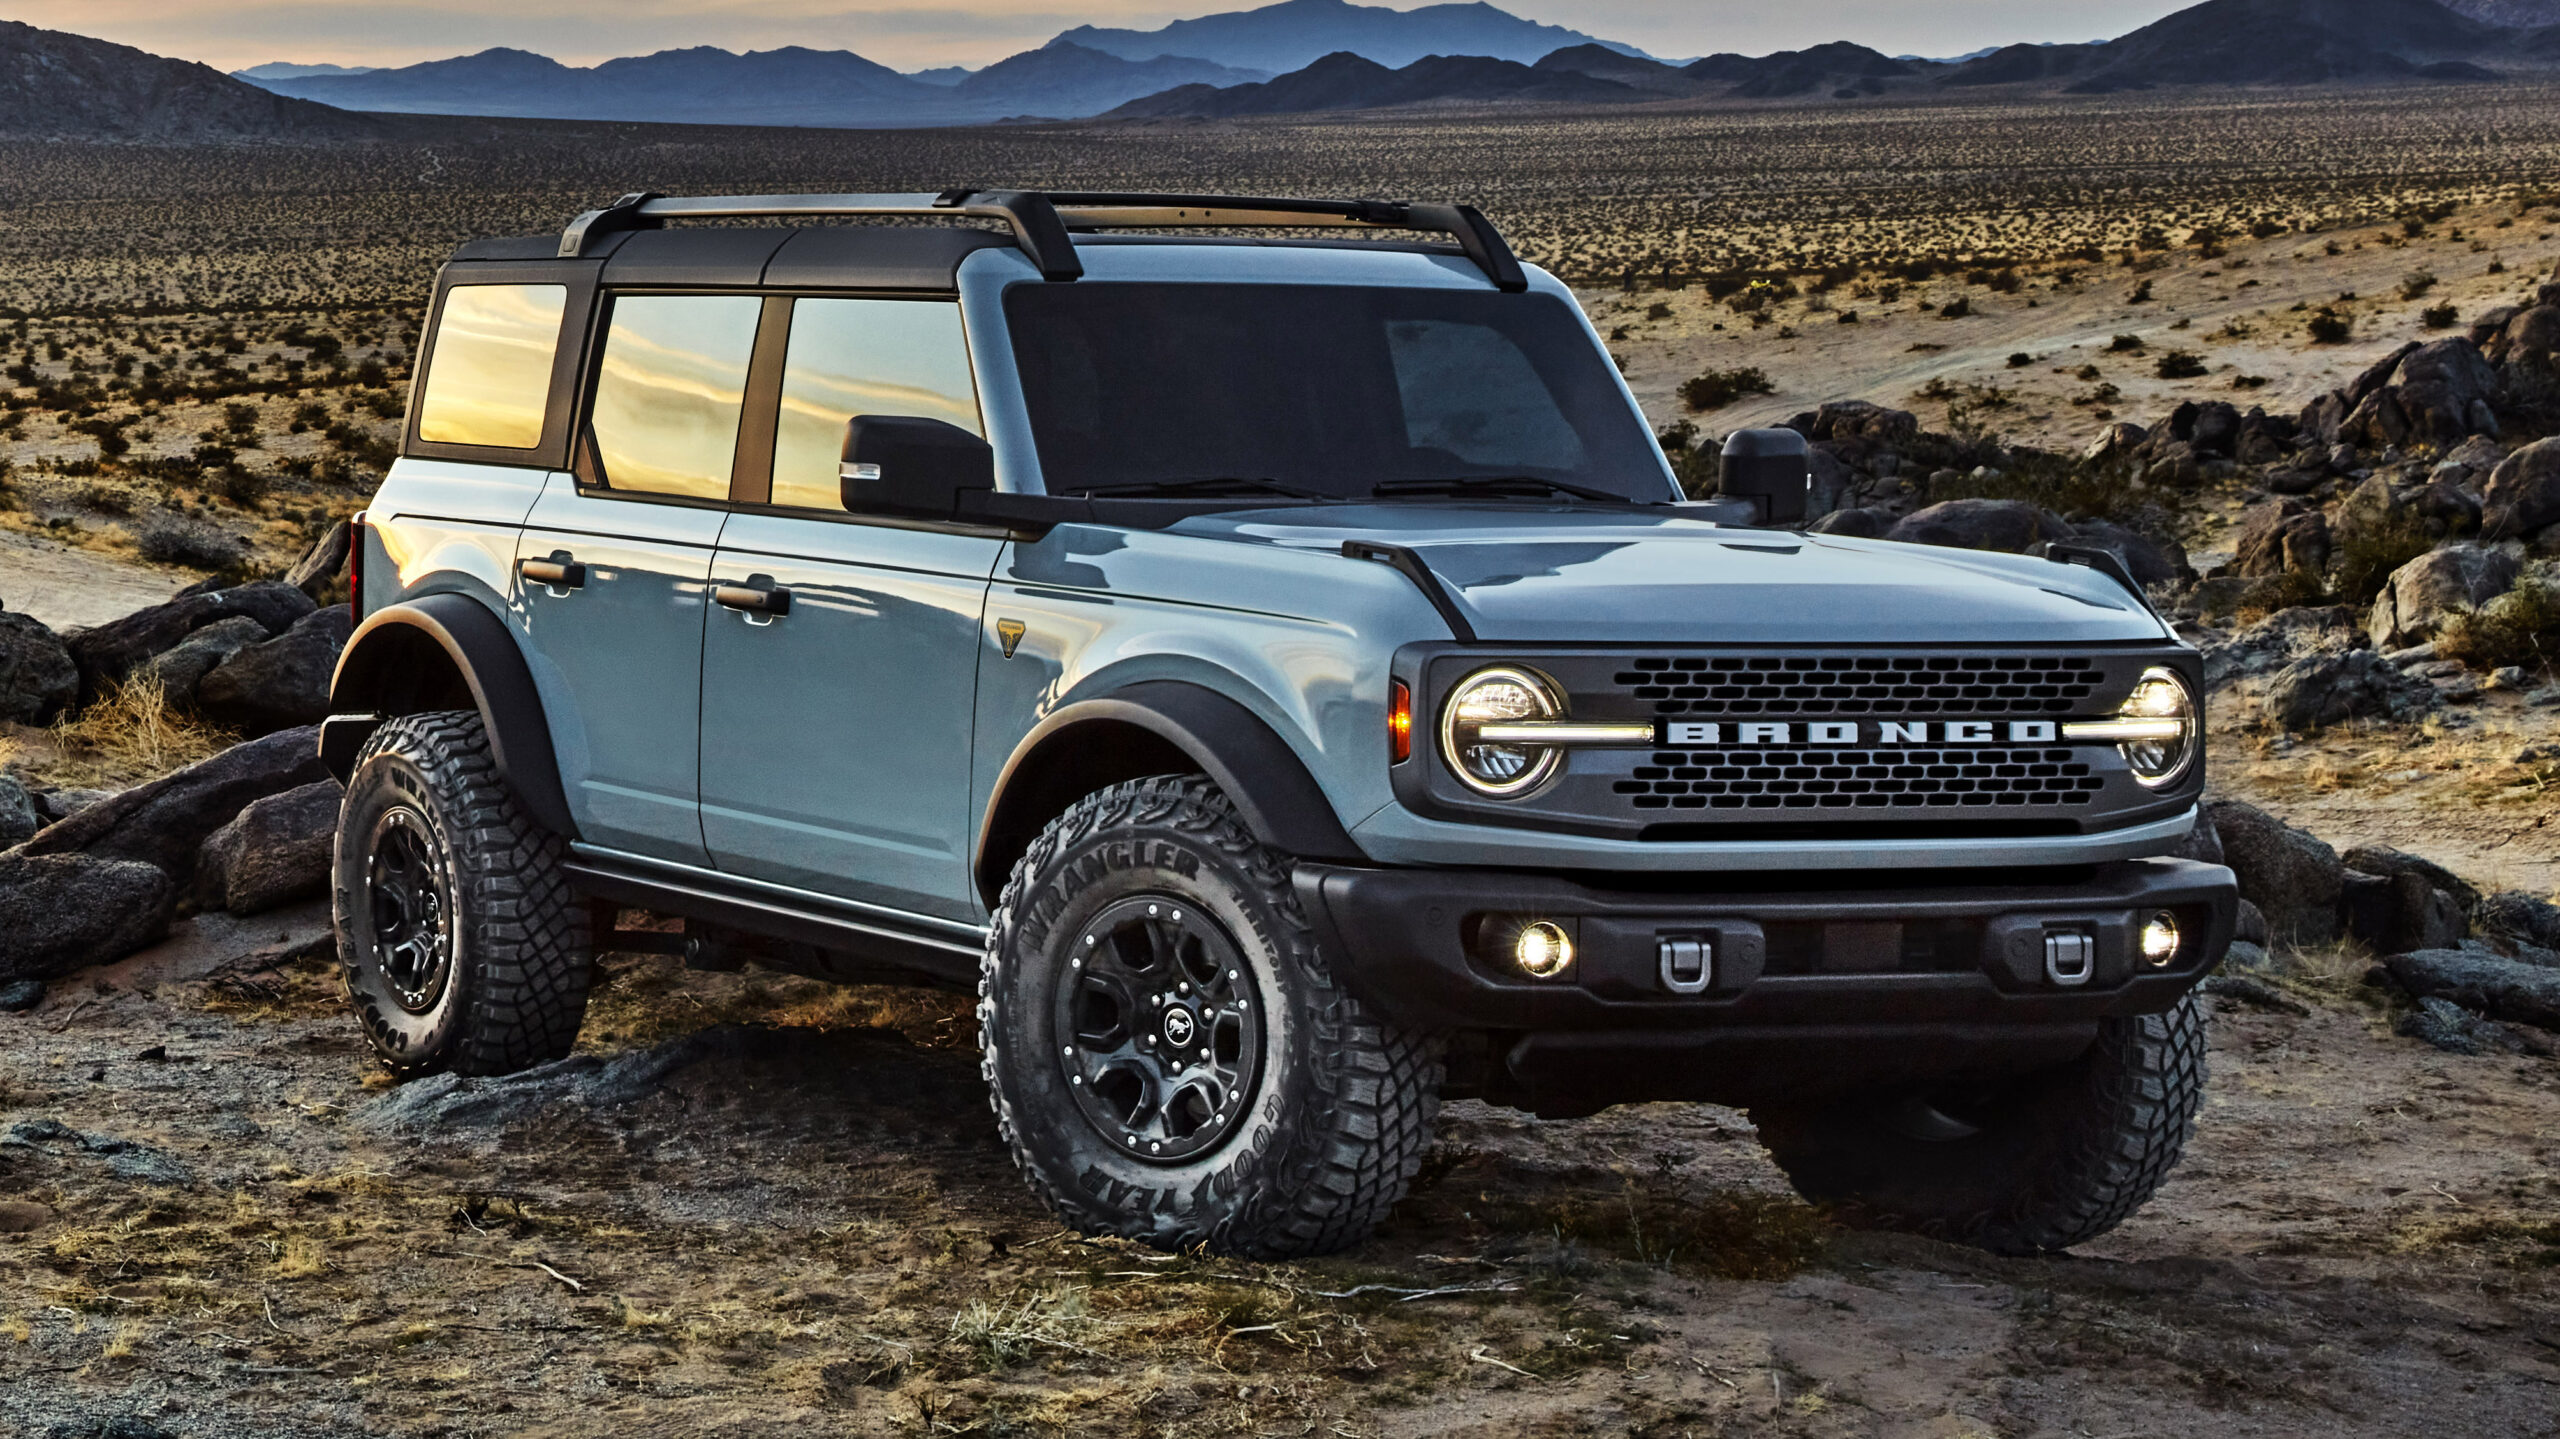 2021 Ford Bronco Revealed: An Off-Road "Wild and Untamed" Model